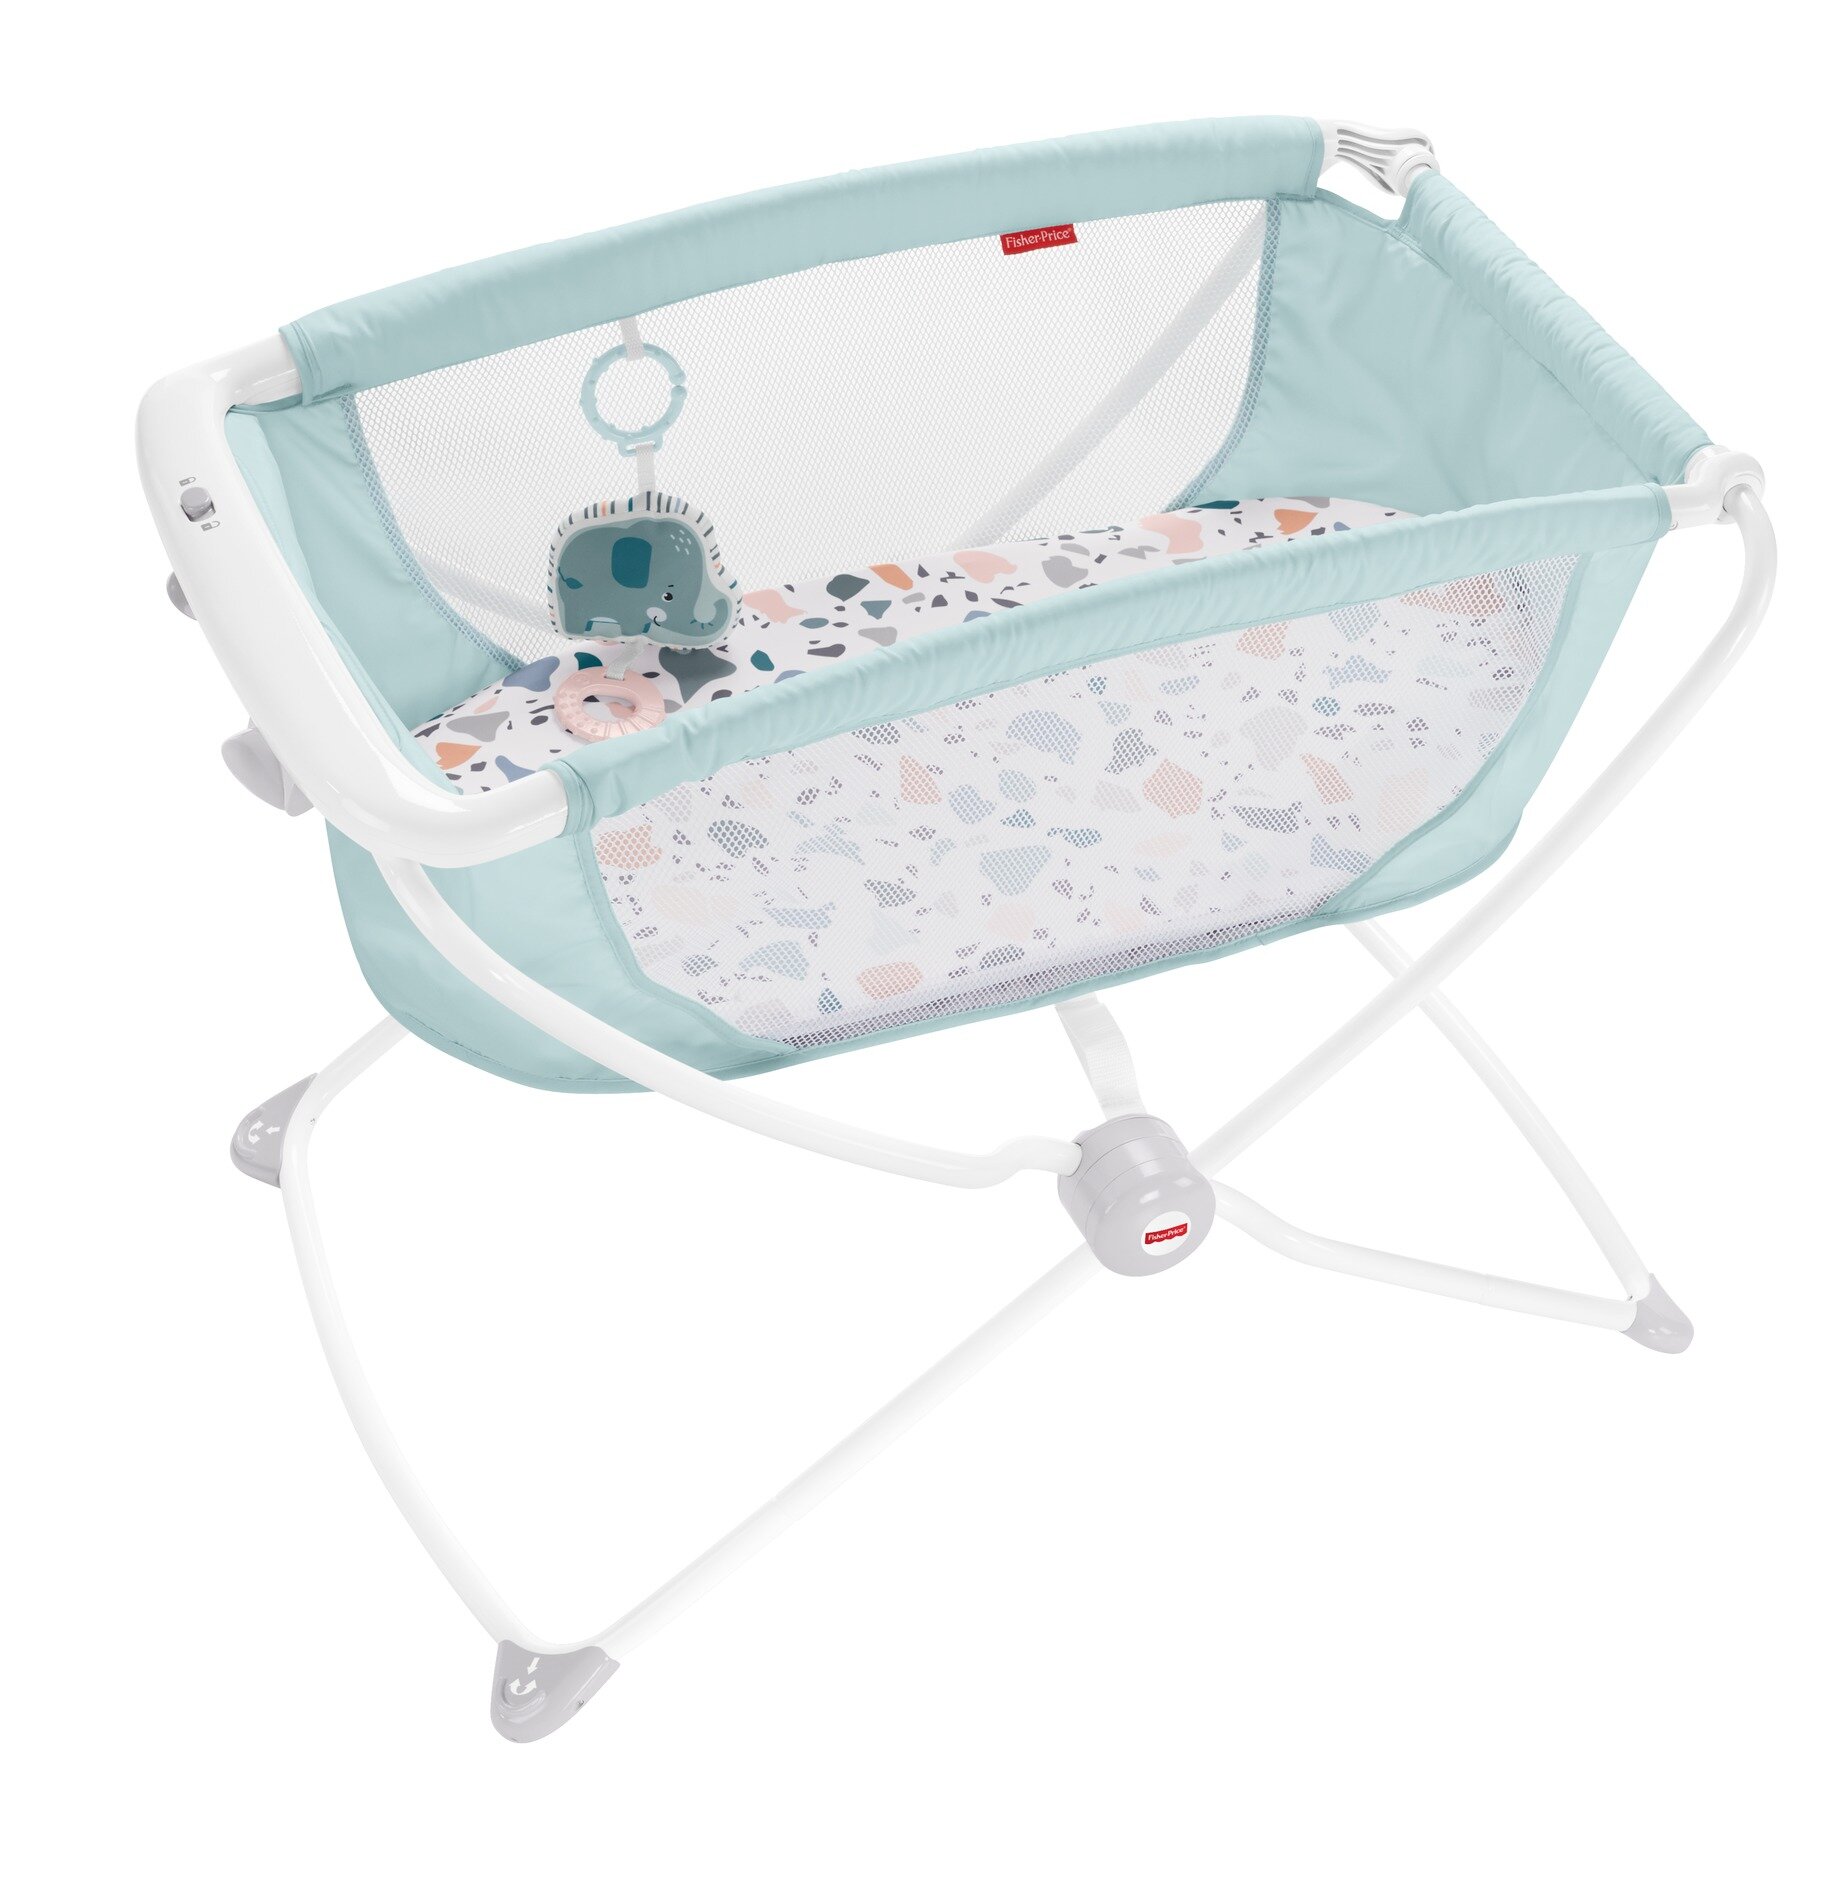 elevated bassinet